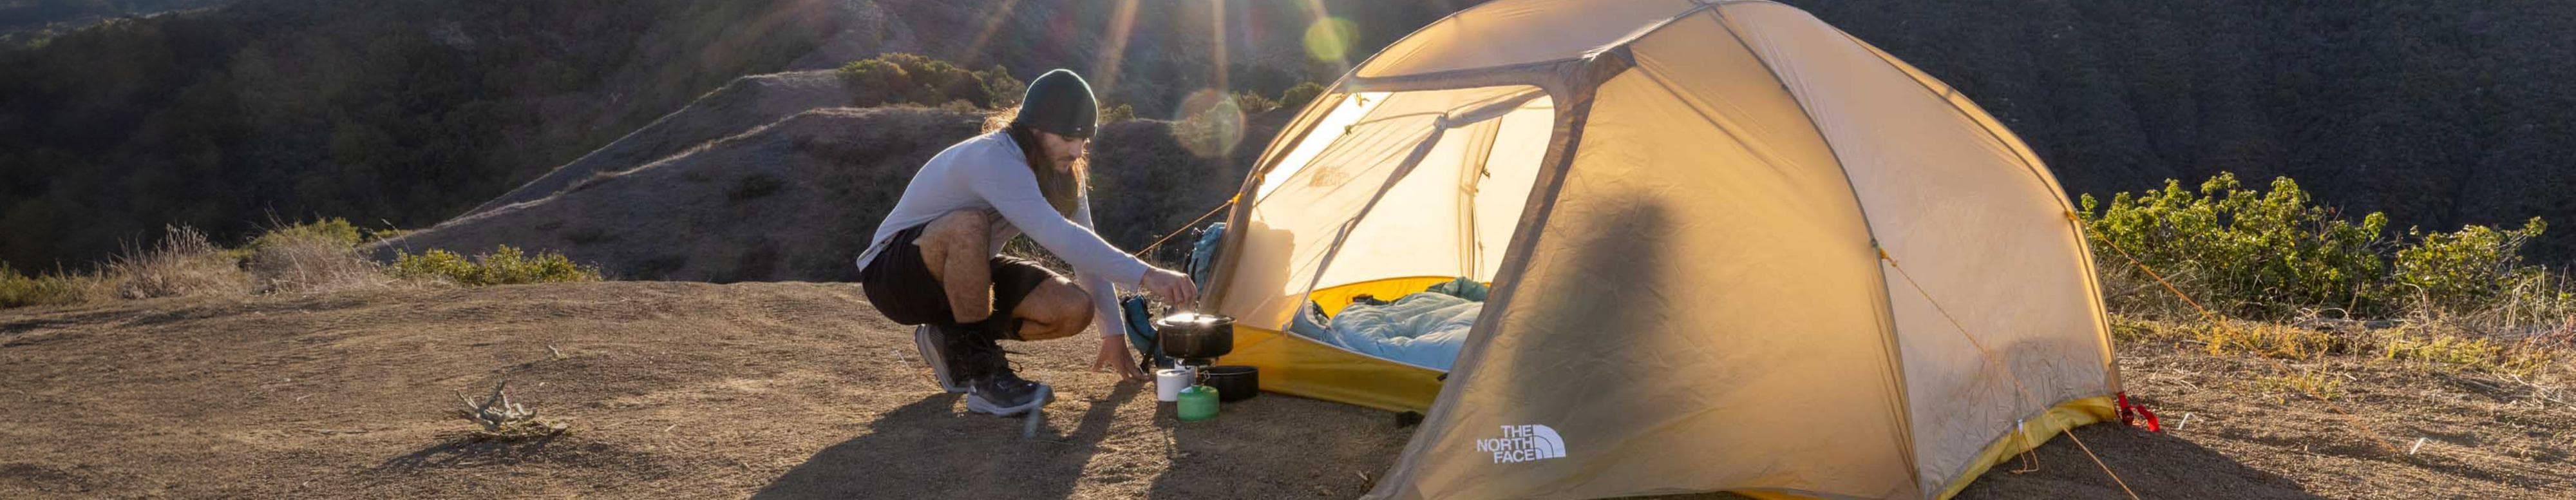 A person is cooking outside of their tent from The North Face with their camp stove. Text reads: “Get back to the basics.”